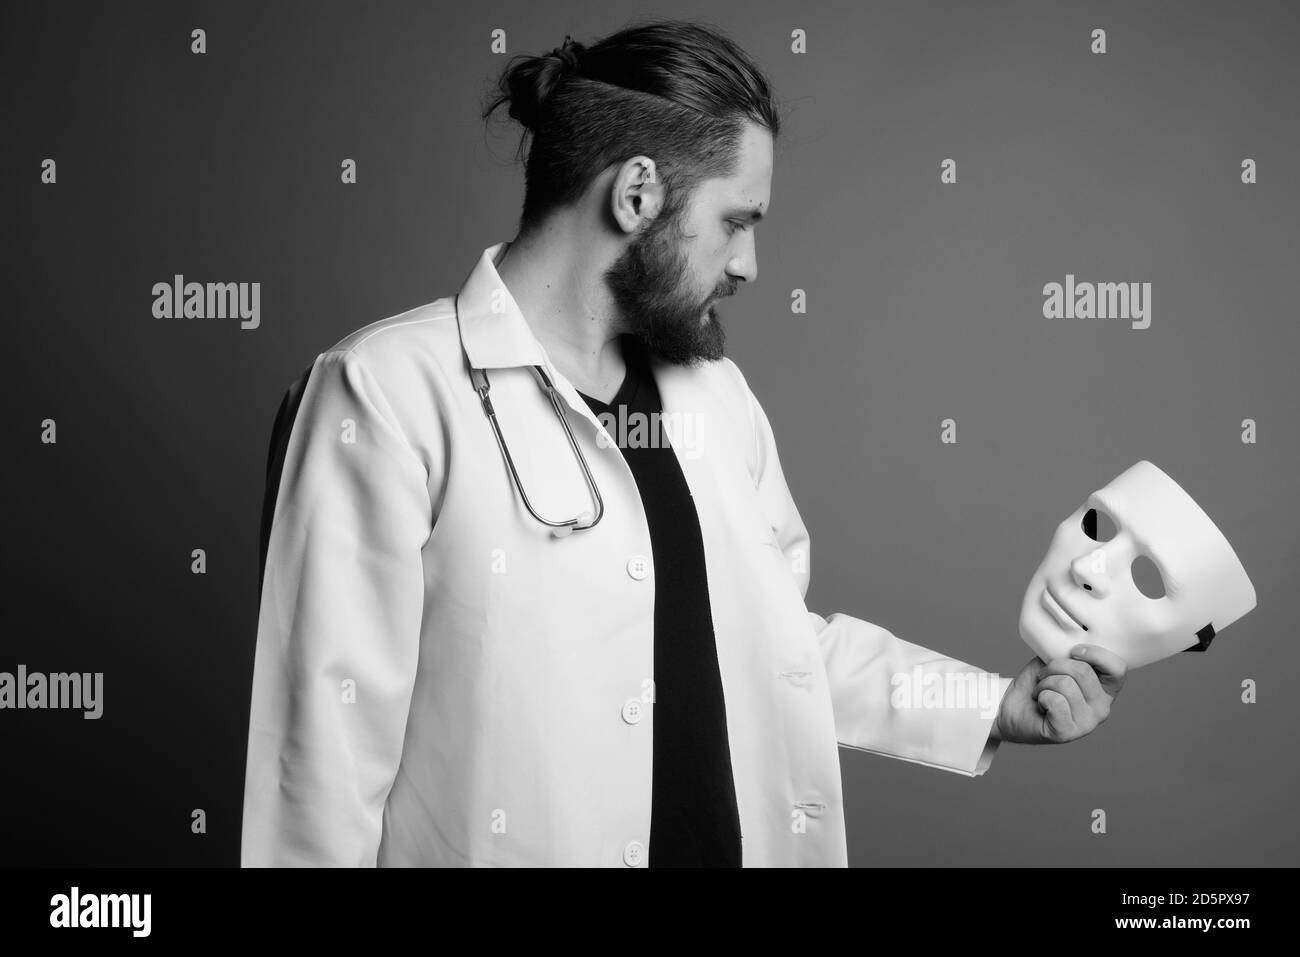 Young bearded man doctor against gray background Stock Photo